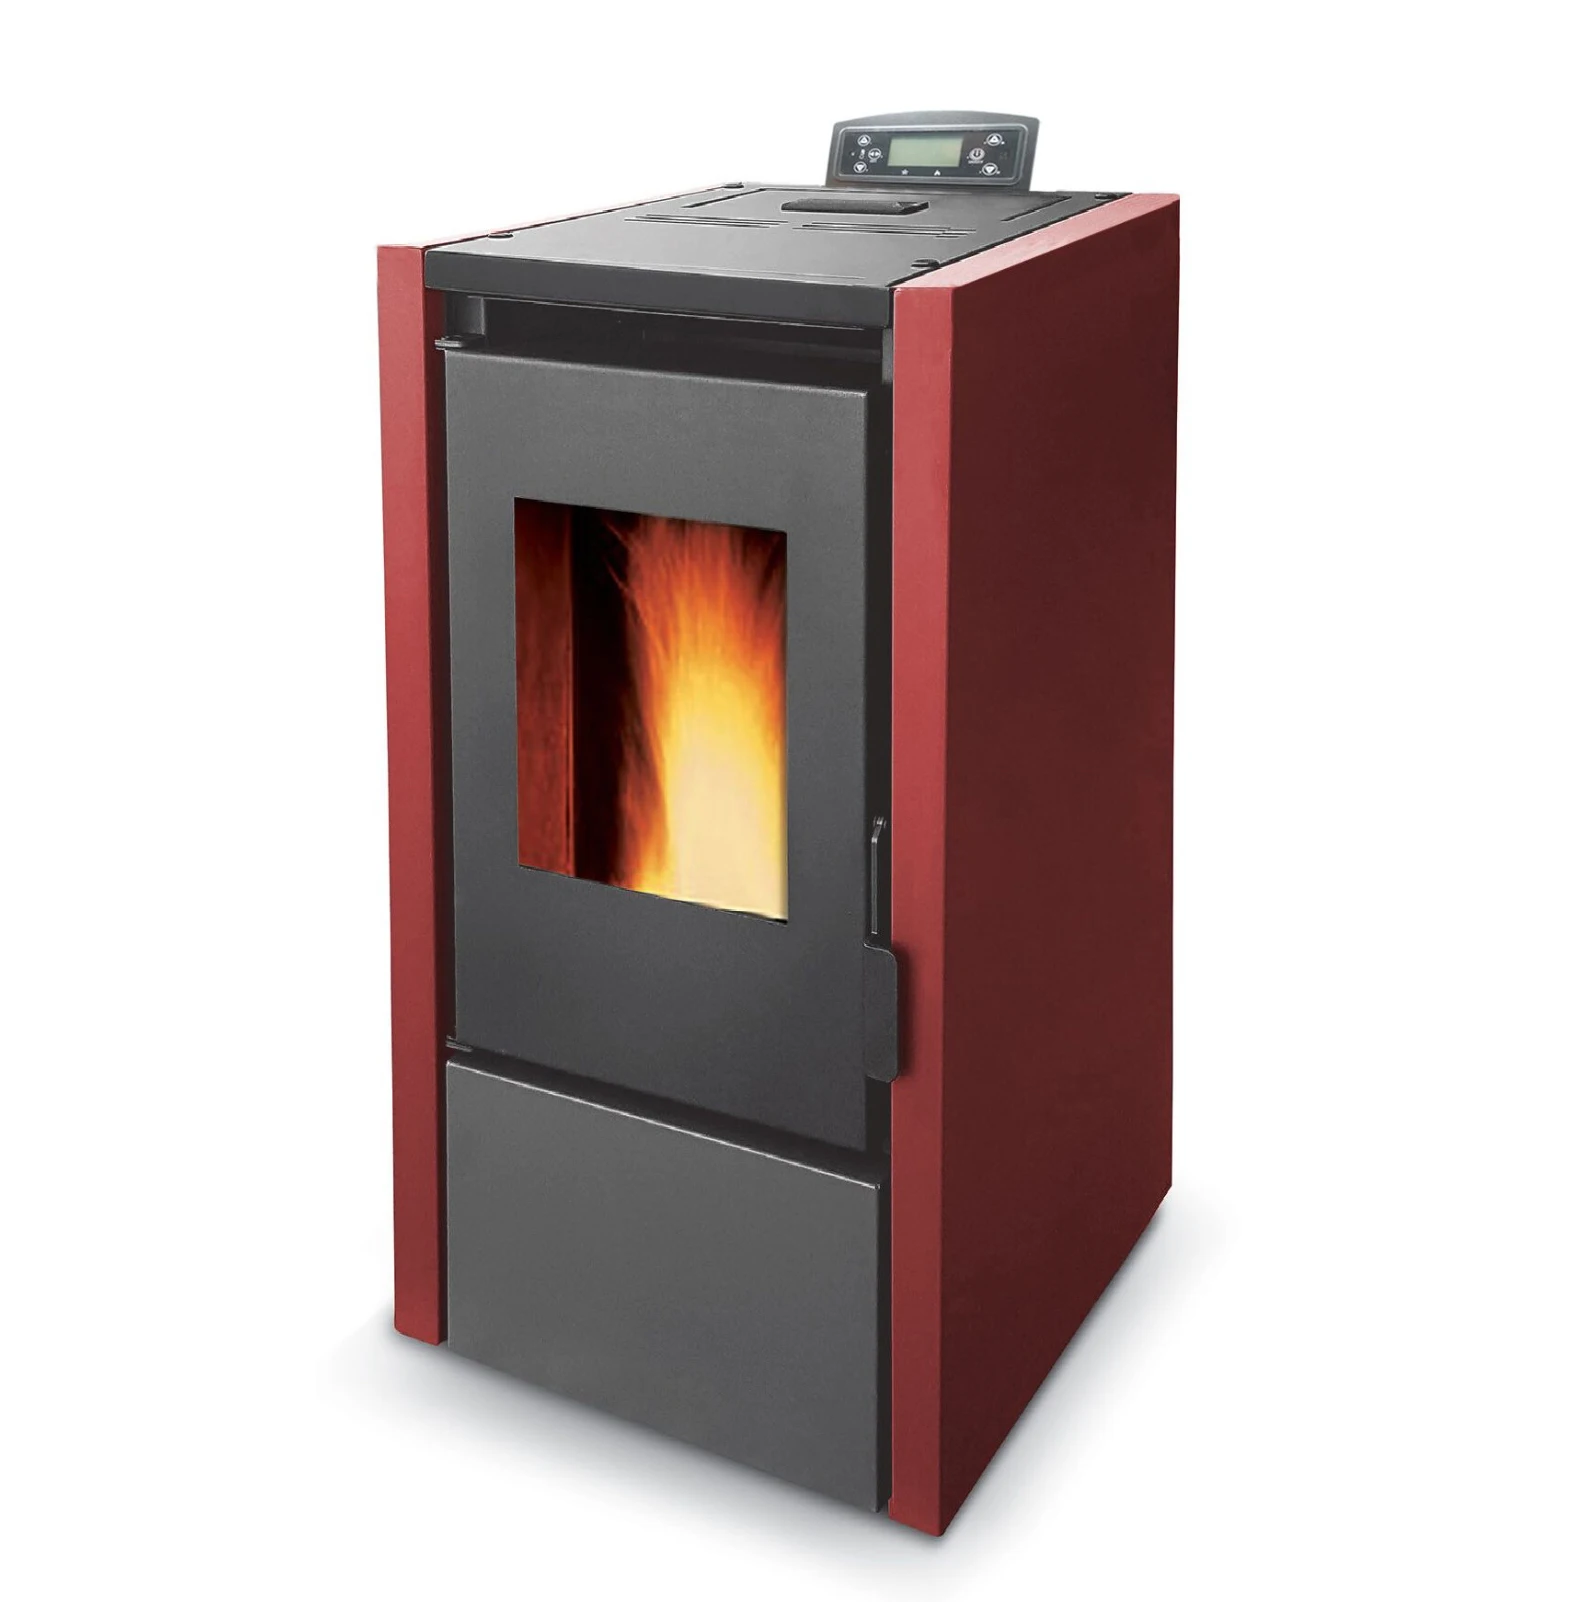 Secondary Combustion Stove Wooden,Wood Burning Cast Iron Pellet